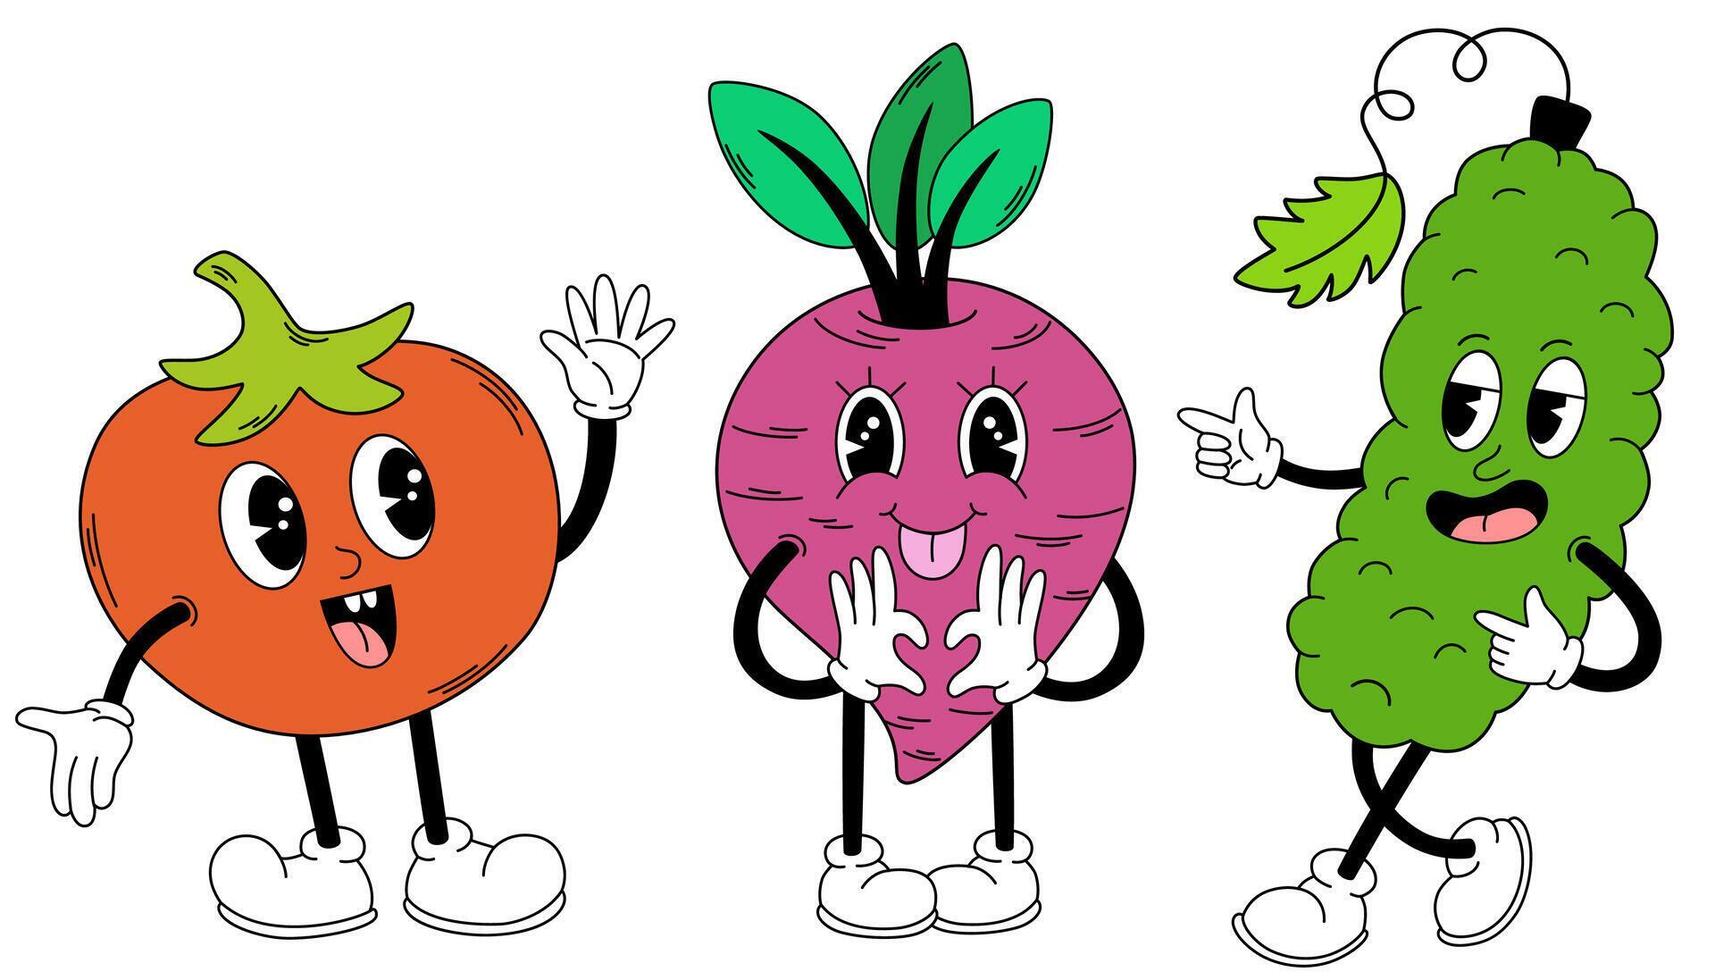 Groovy vegetables set. Hand draw Funny Retro vintage trendy style vegetables cartoon character. Cucumber, tomato, beetroot. doodle comic collection vector